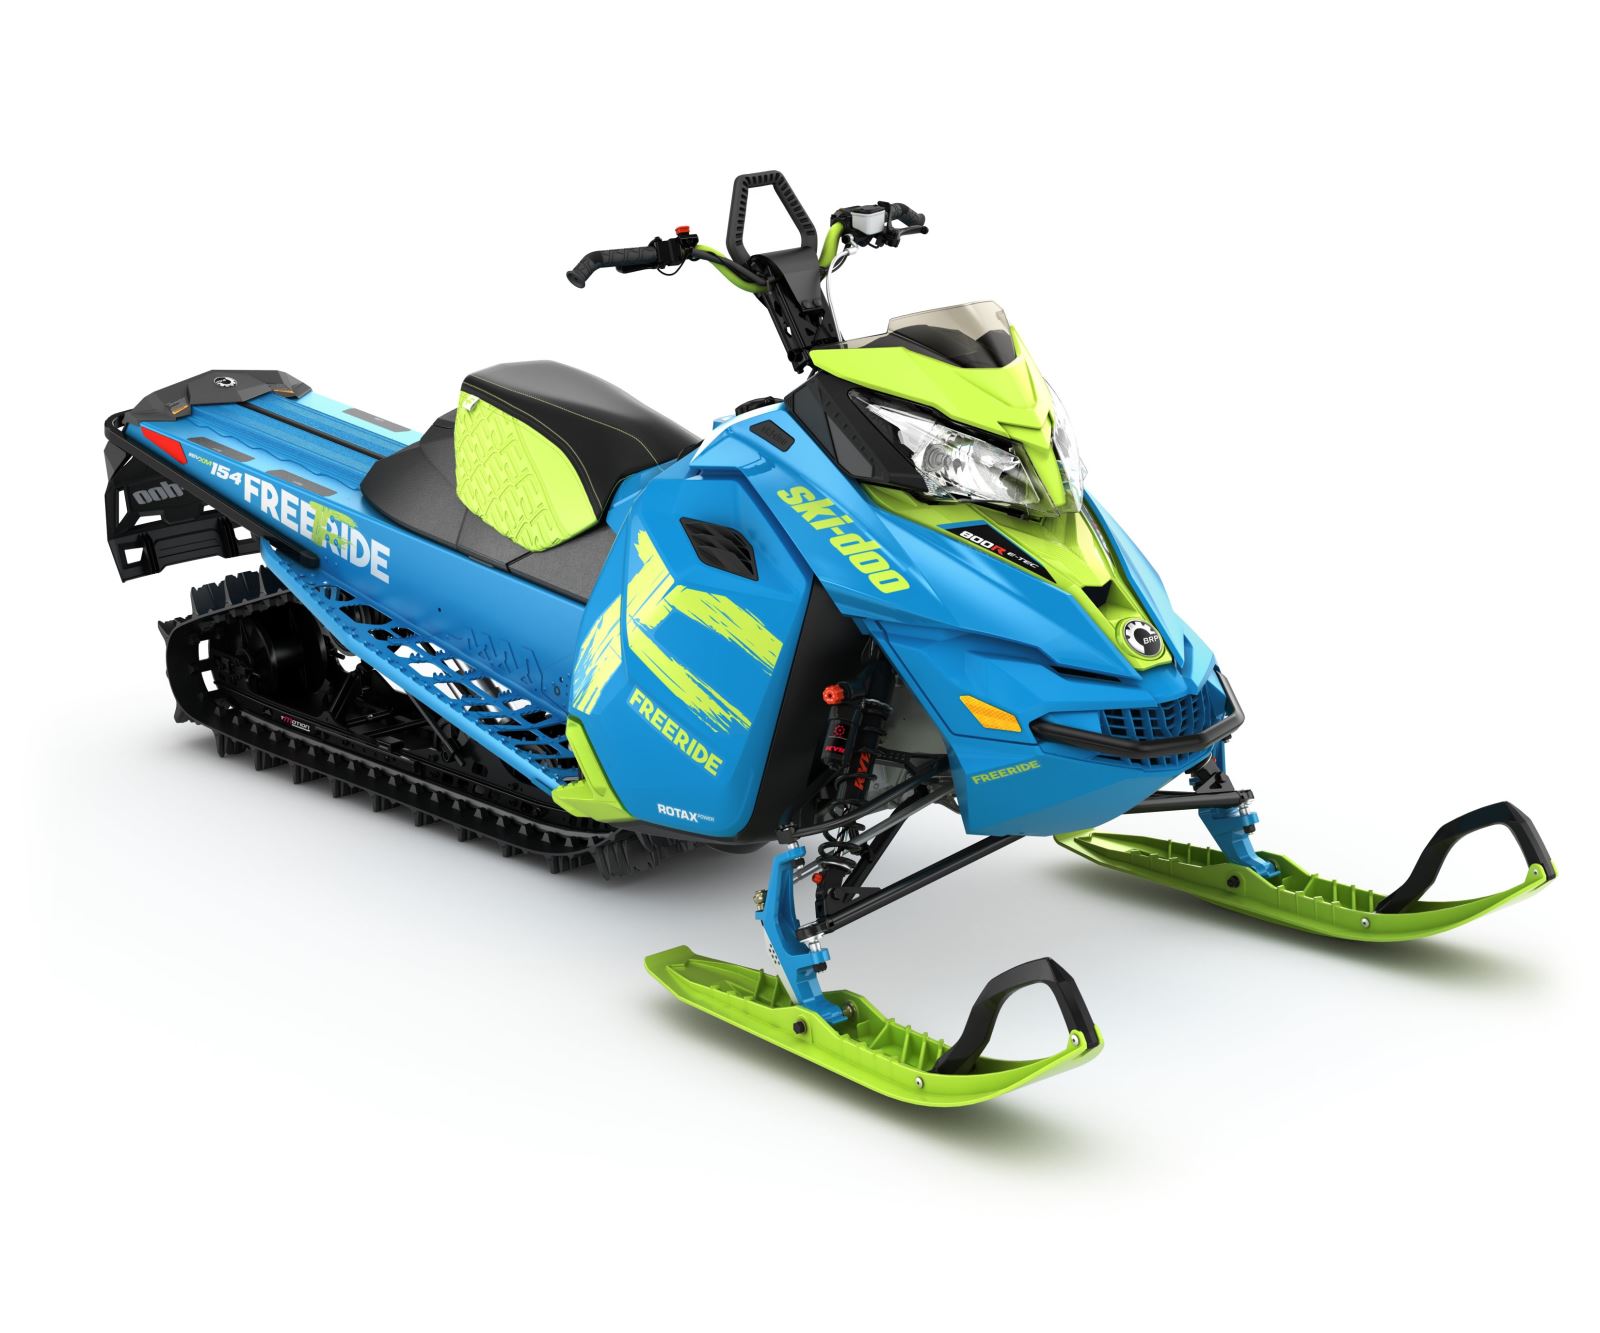 New 2016 Freeride 146 Release, Reviews and Models on newcarrelease.biz